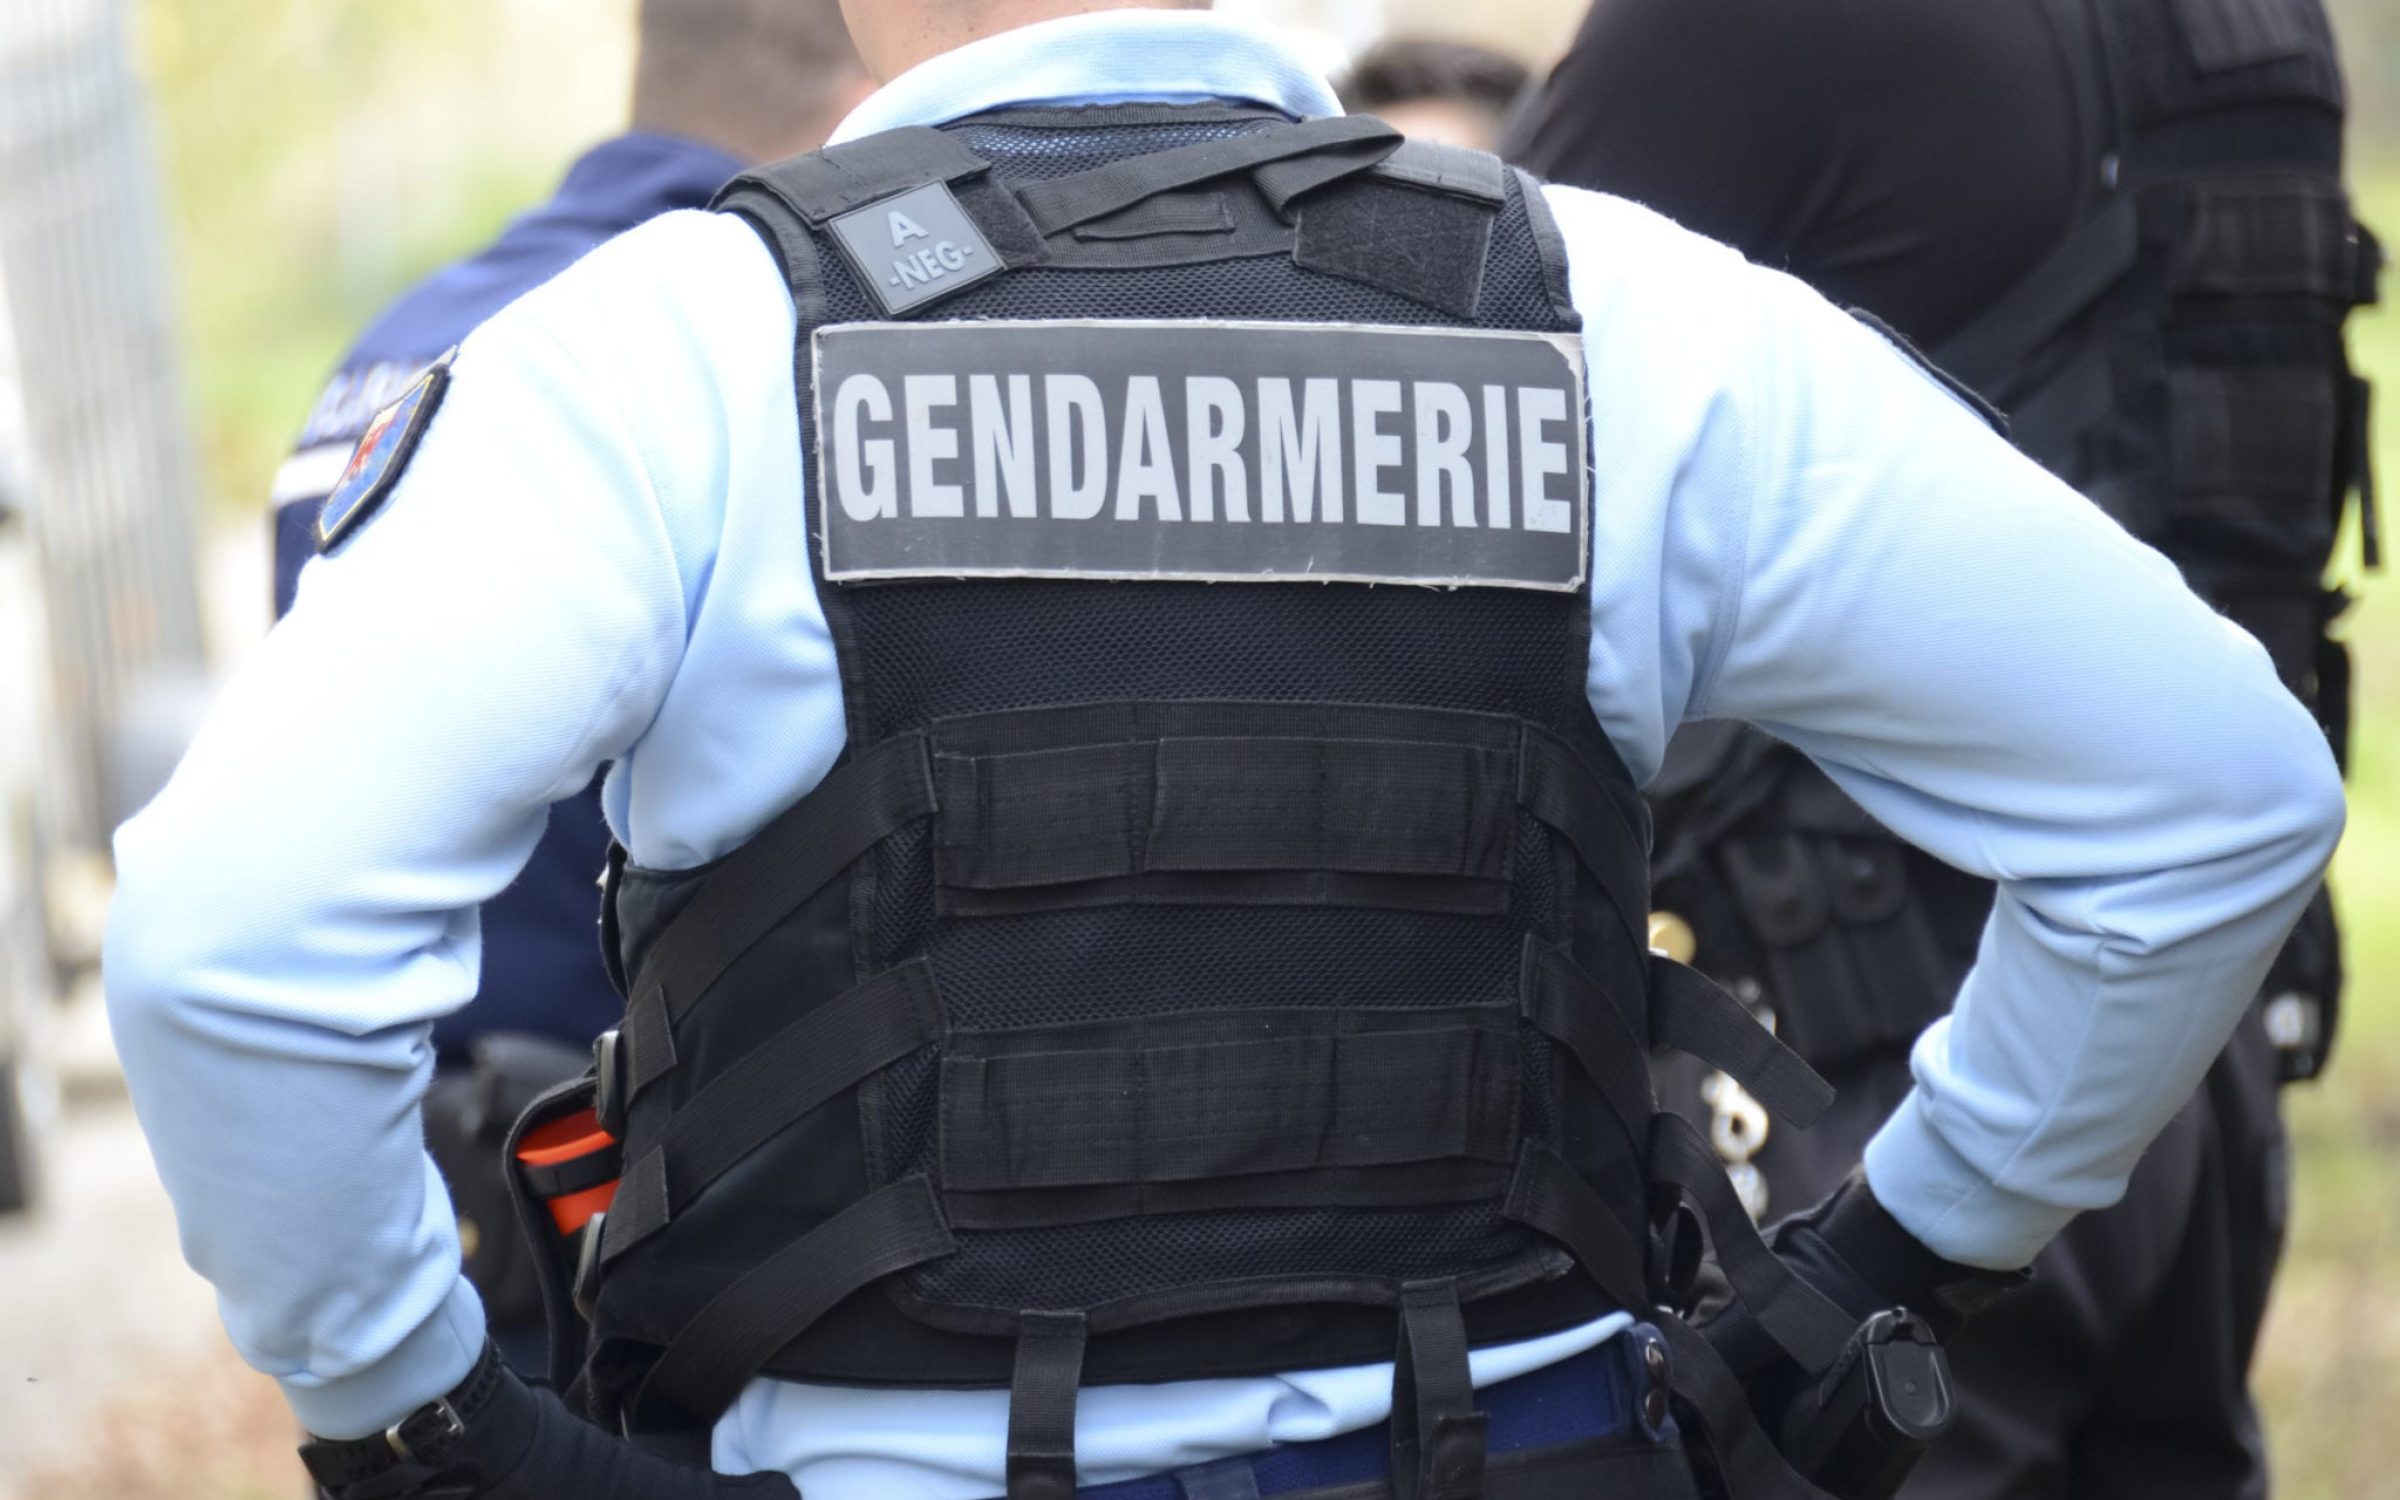 French Gendarmerie police man stands with hands on hips and back to camera